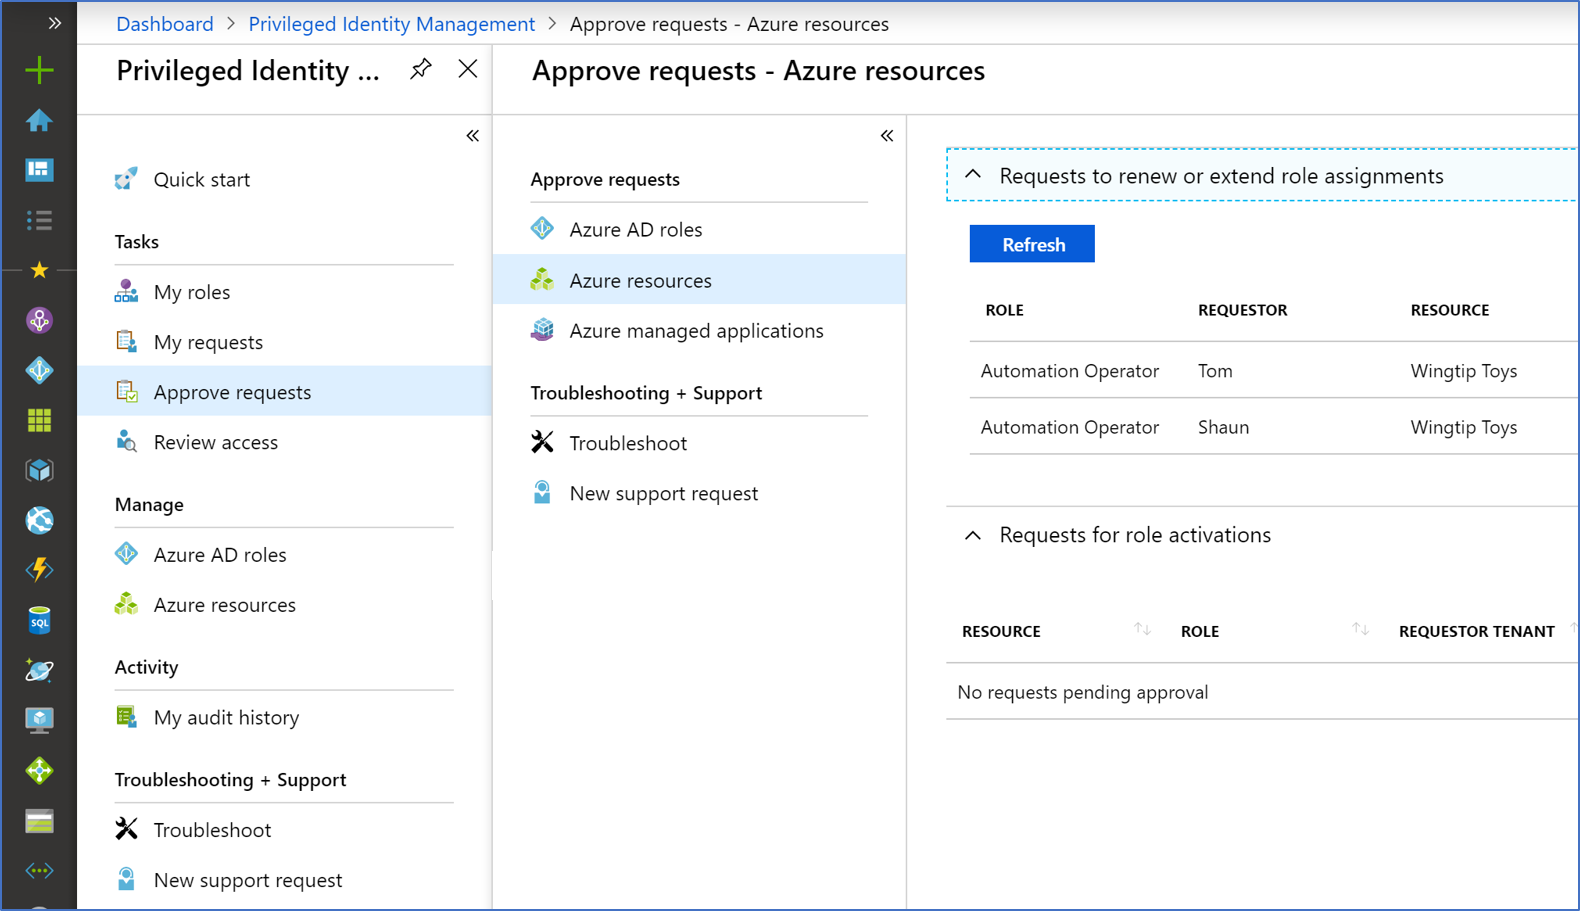 Approve requests - Azure resources page showing request to review